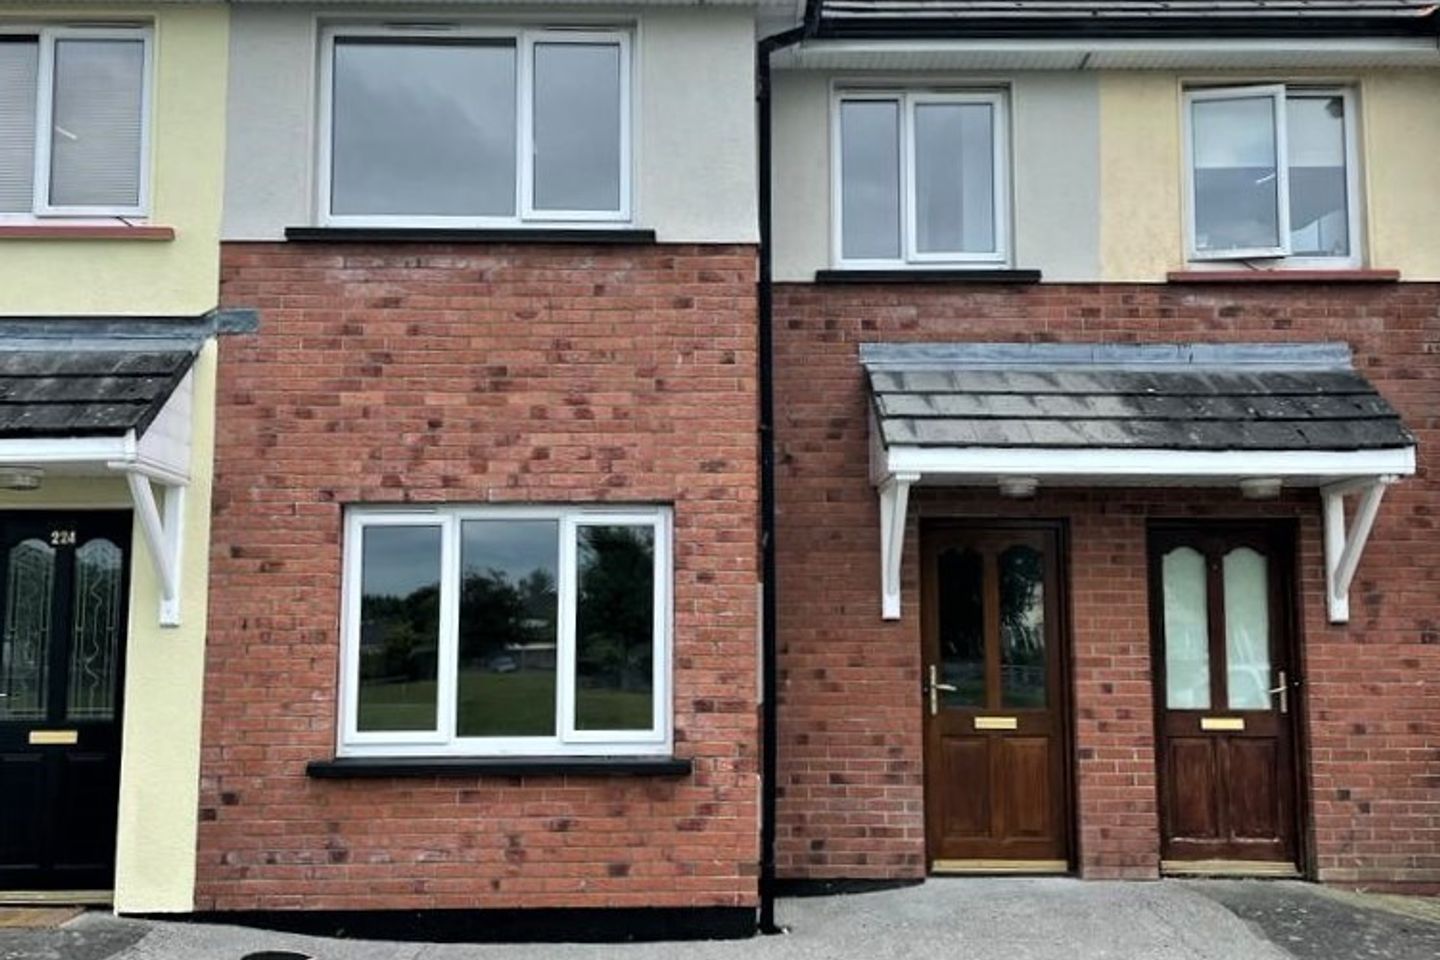 225 Palace Fields, Tuam, Co. Galway, H54PD25